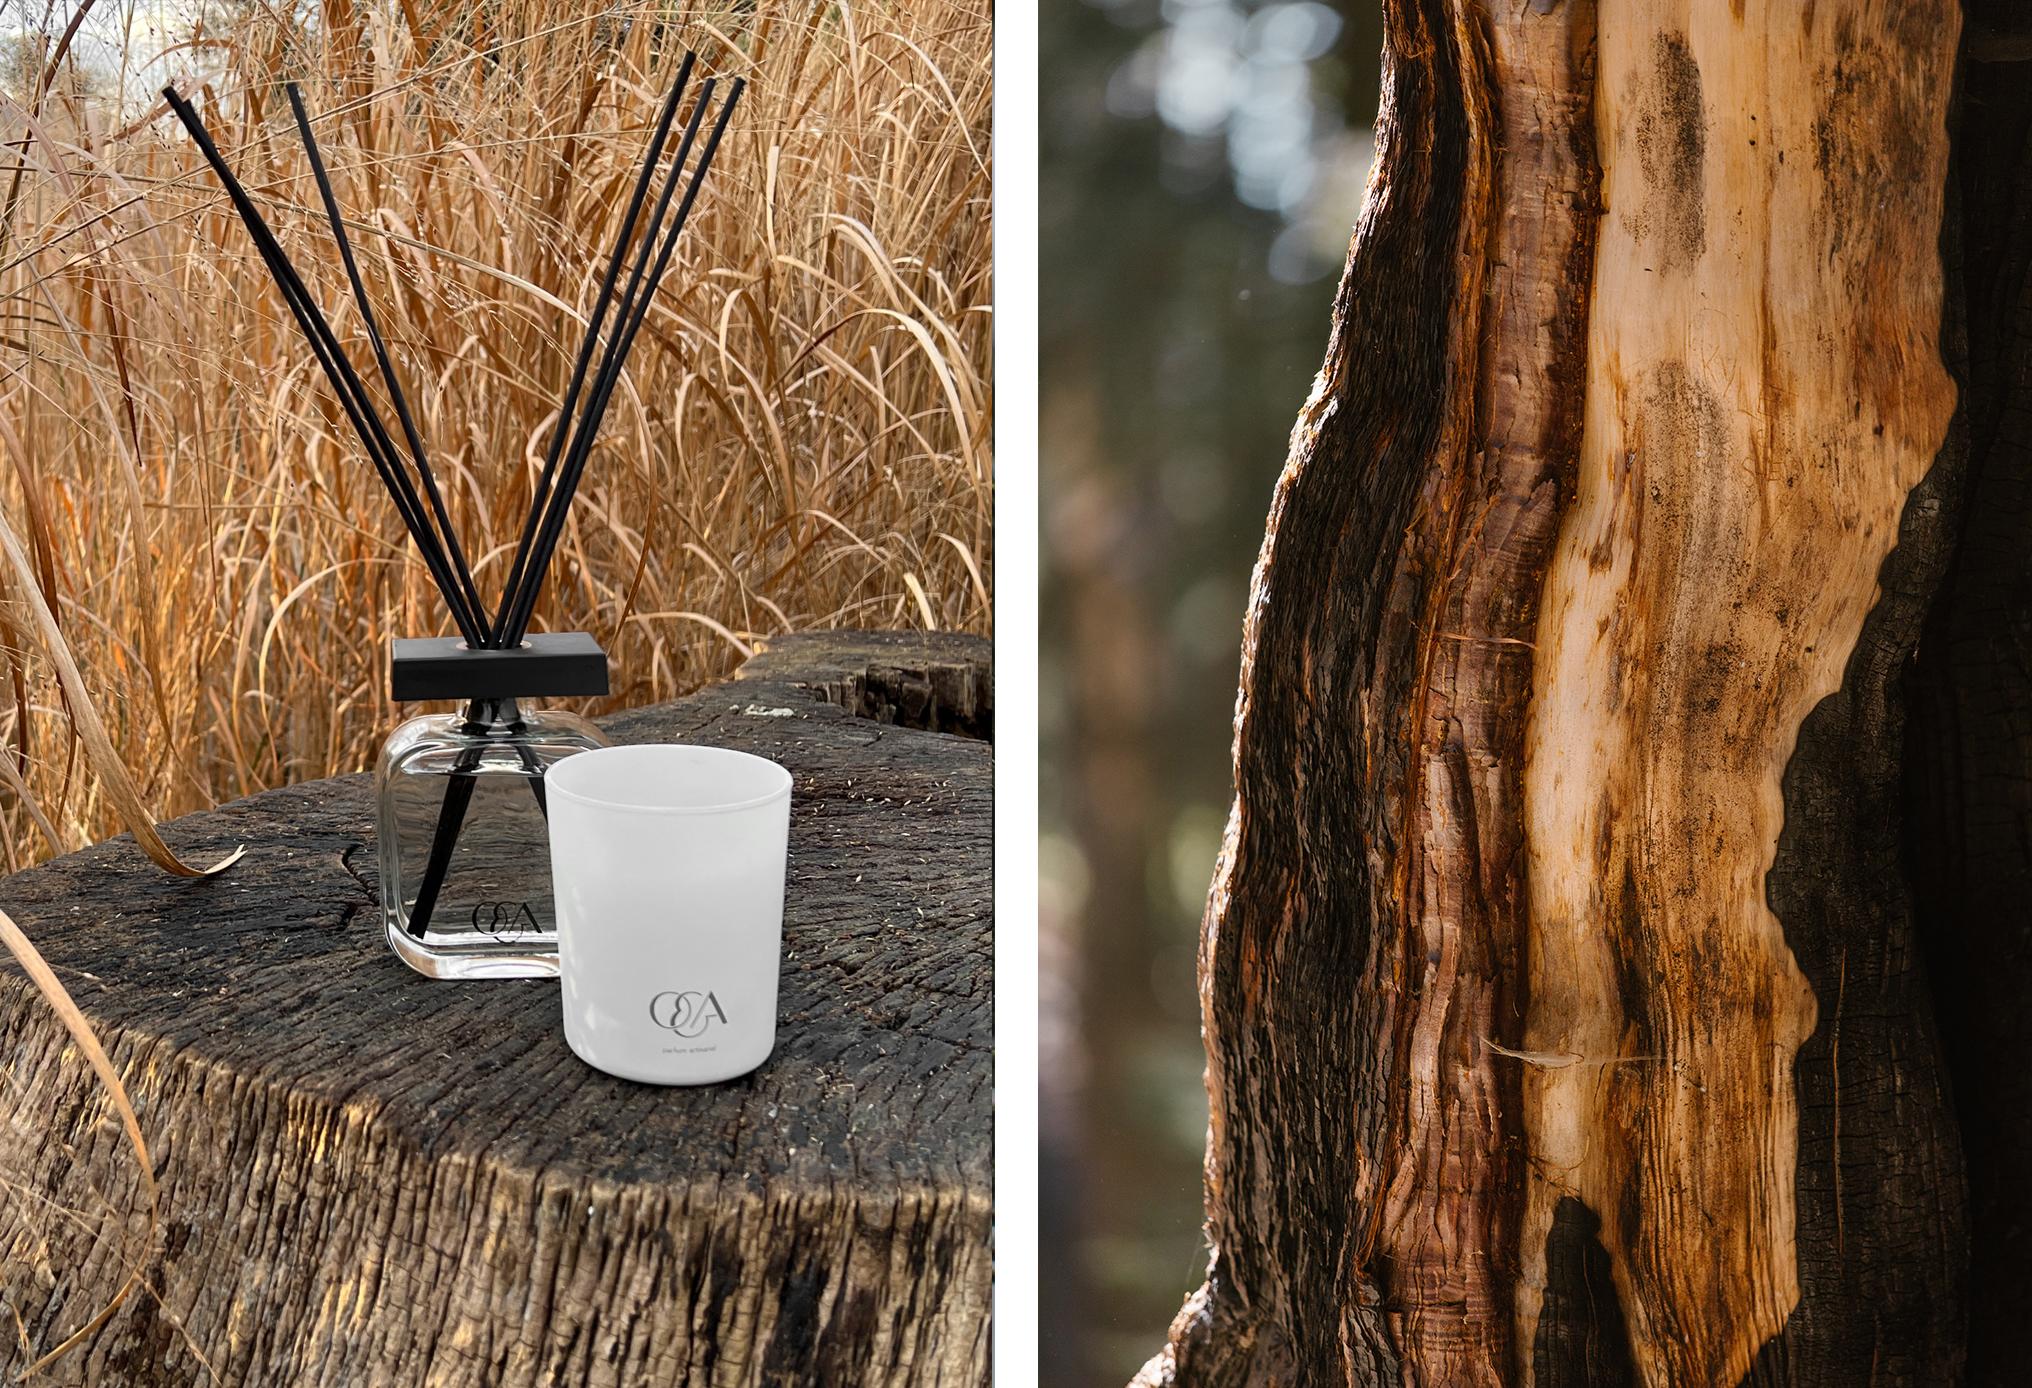 O&A London creates sophisticated scents for your home together with the best perfume houses in Grasse. Individually designed home diffusers will add an indelible impression of your home, literally in the air itself.

Top notes: citrus